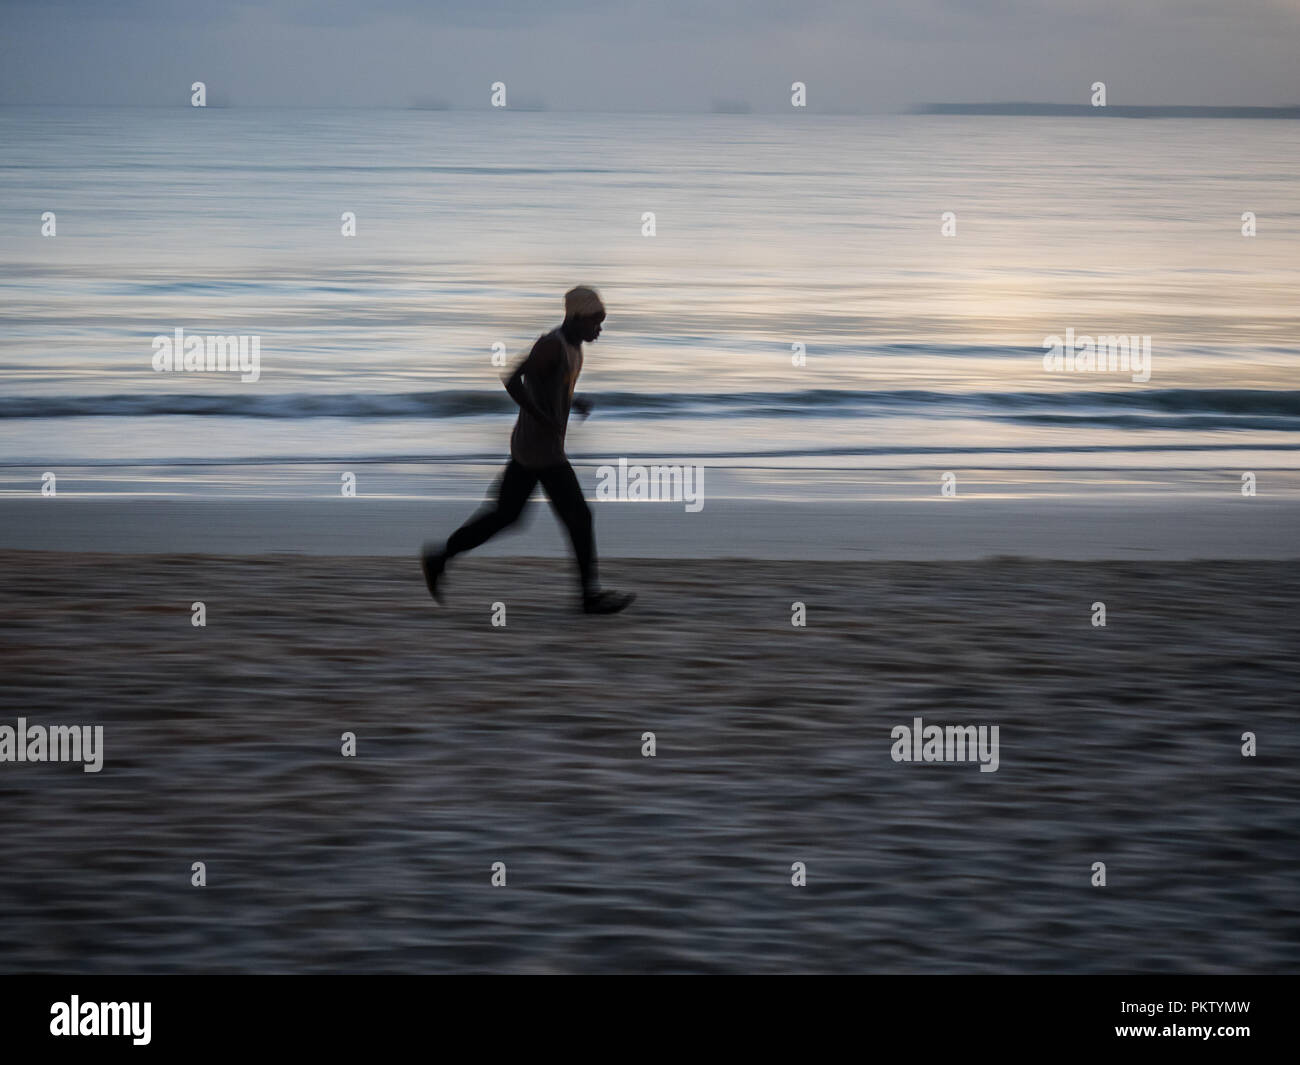 Local athlete doing morning exercise at dawn on the beach at Dar es Salaam, Tanzania Stock Photo